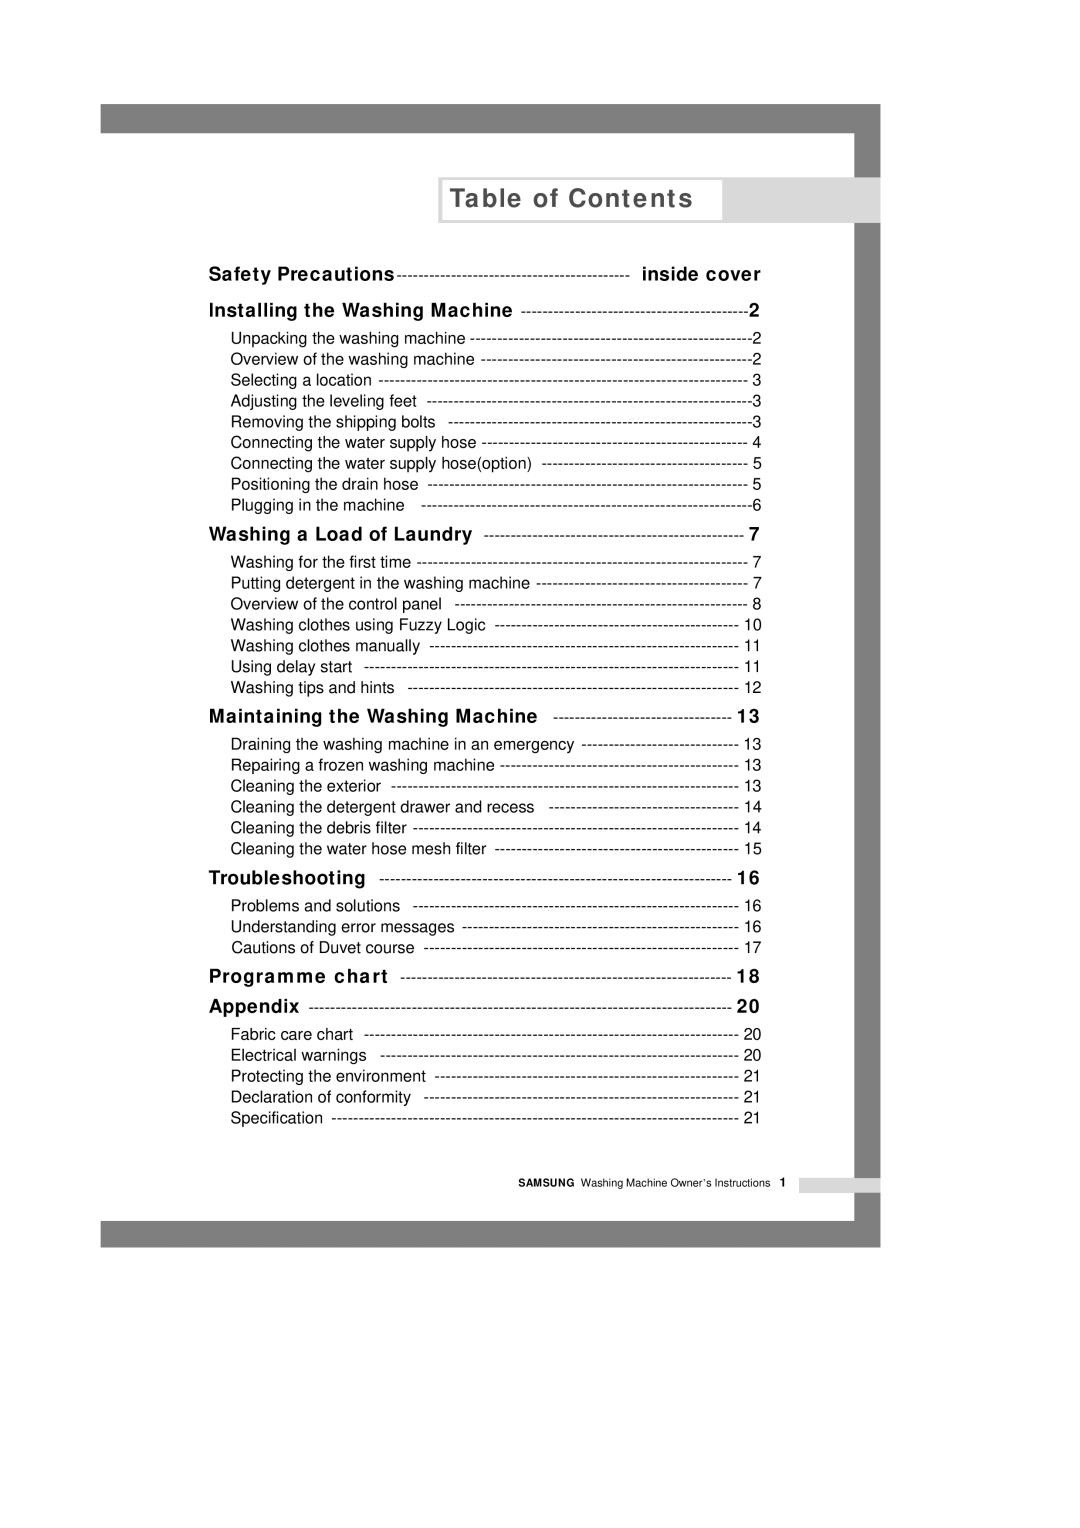 Samsung Q1433, Q1633, Q1233 manual Table of Contents, inside cover 